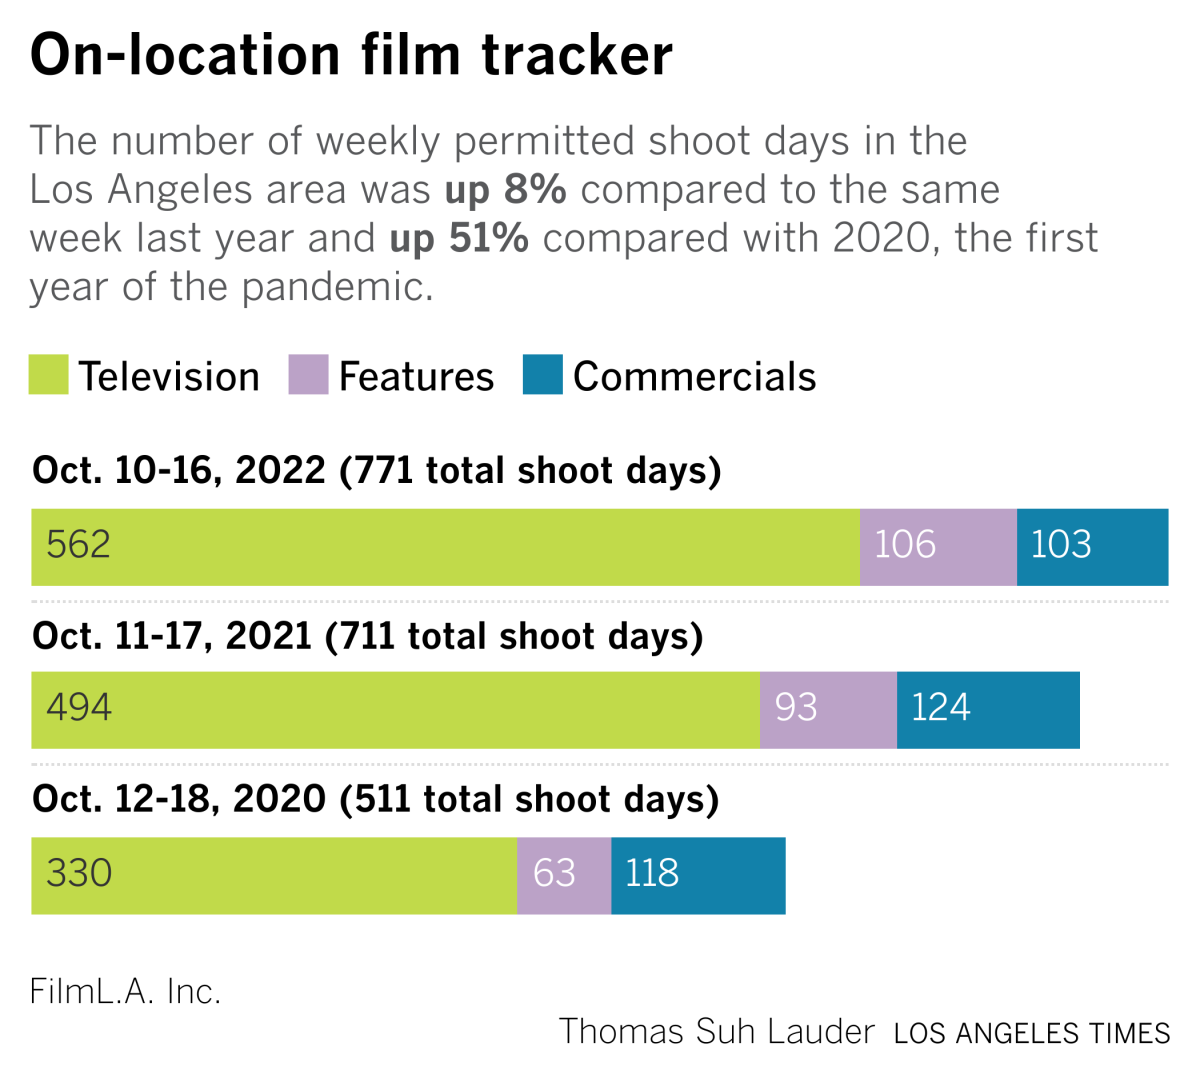 A bar chart comparing weekly permitted shoot days in Los Angeles in the same week for 2020, 2021 and 2022